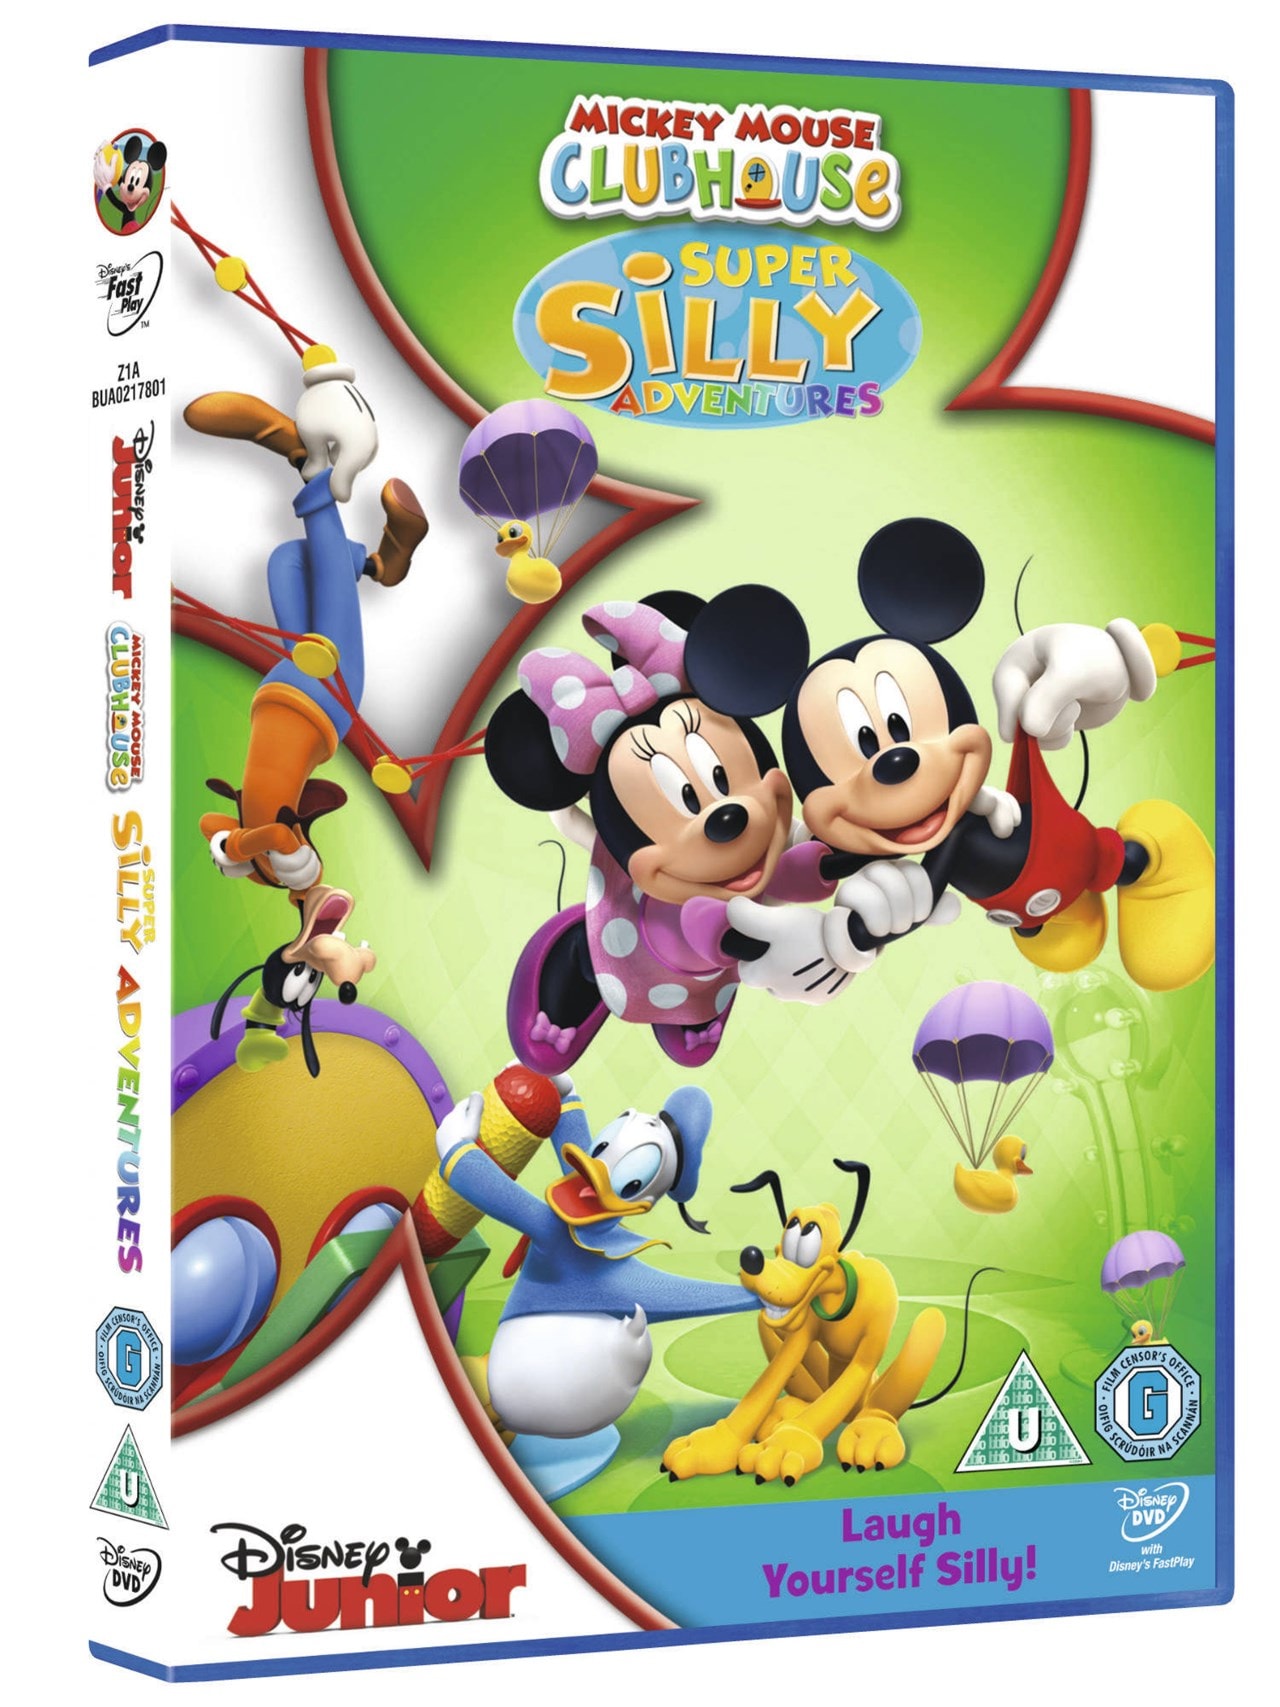 Mickey Mouse Clubhouse: Super Silly Adventures | DVD | Free shipping ...